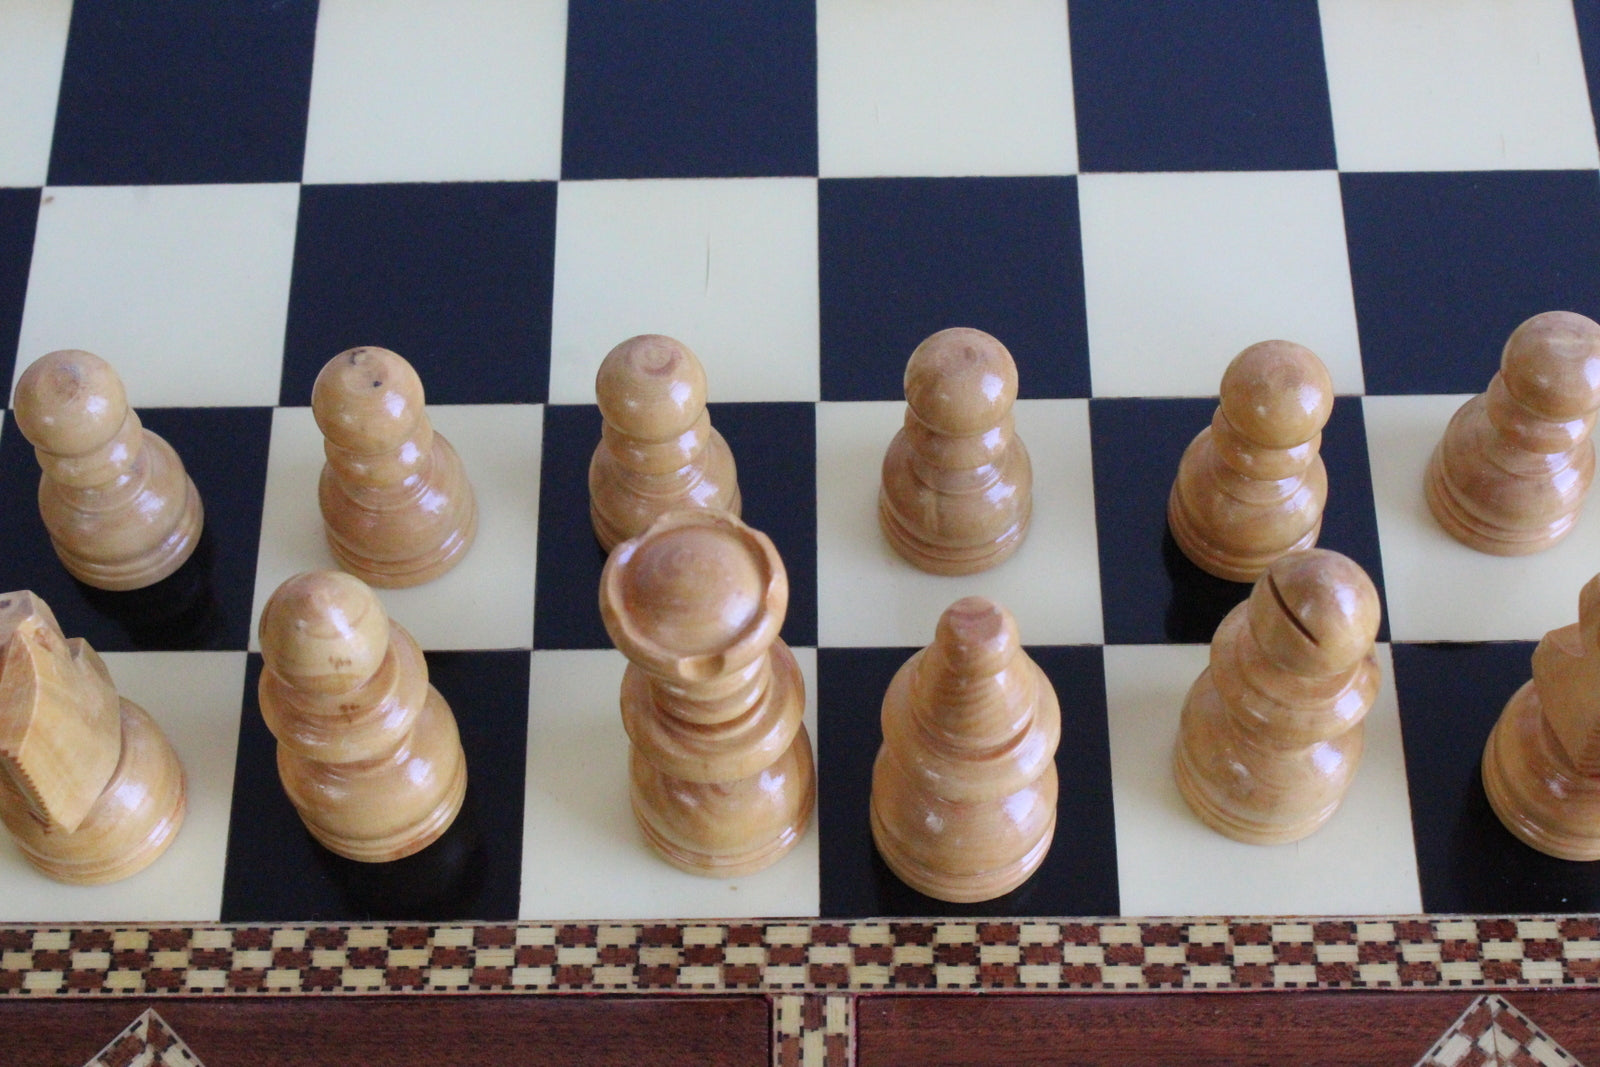 Vintage Marquetry Spanish Chess Board Set - Kernow Furniture